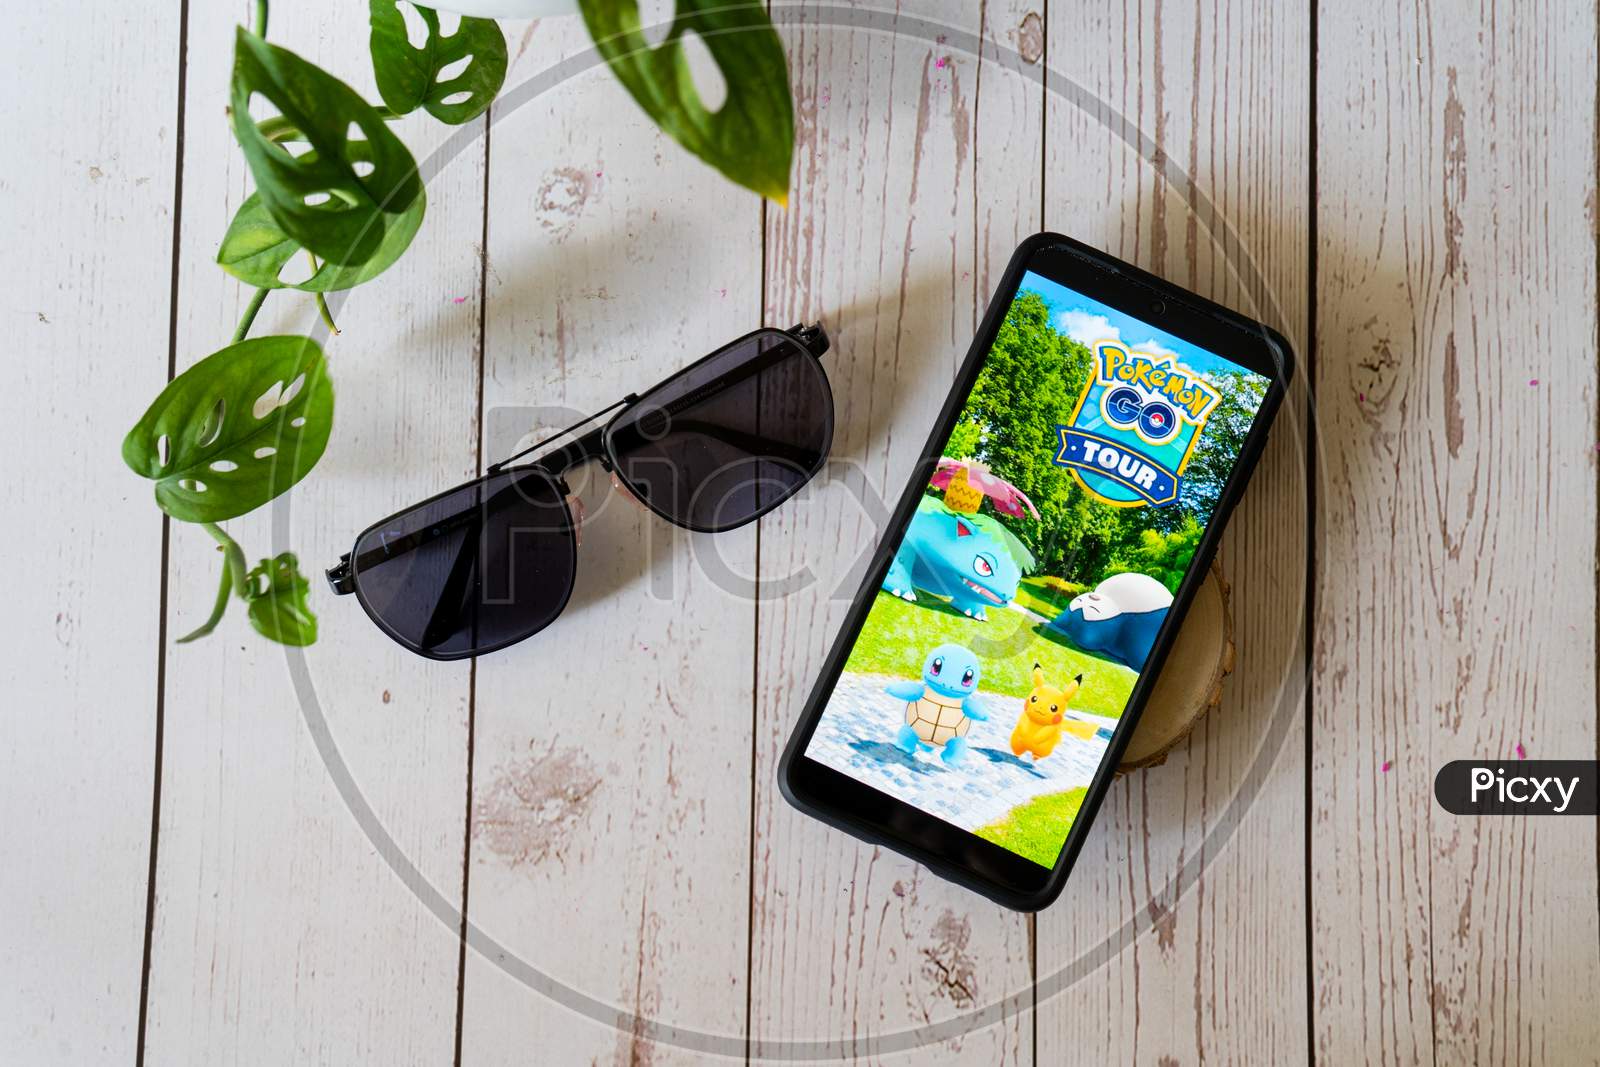 Famous Augmented Reality Virtual Game Pokemon Go Tour Playing On A Mobile Phone On A Wooden Table Outdoors With Plants Goggles Showing People Enjoying This Multiplayer Game